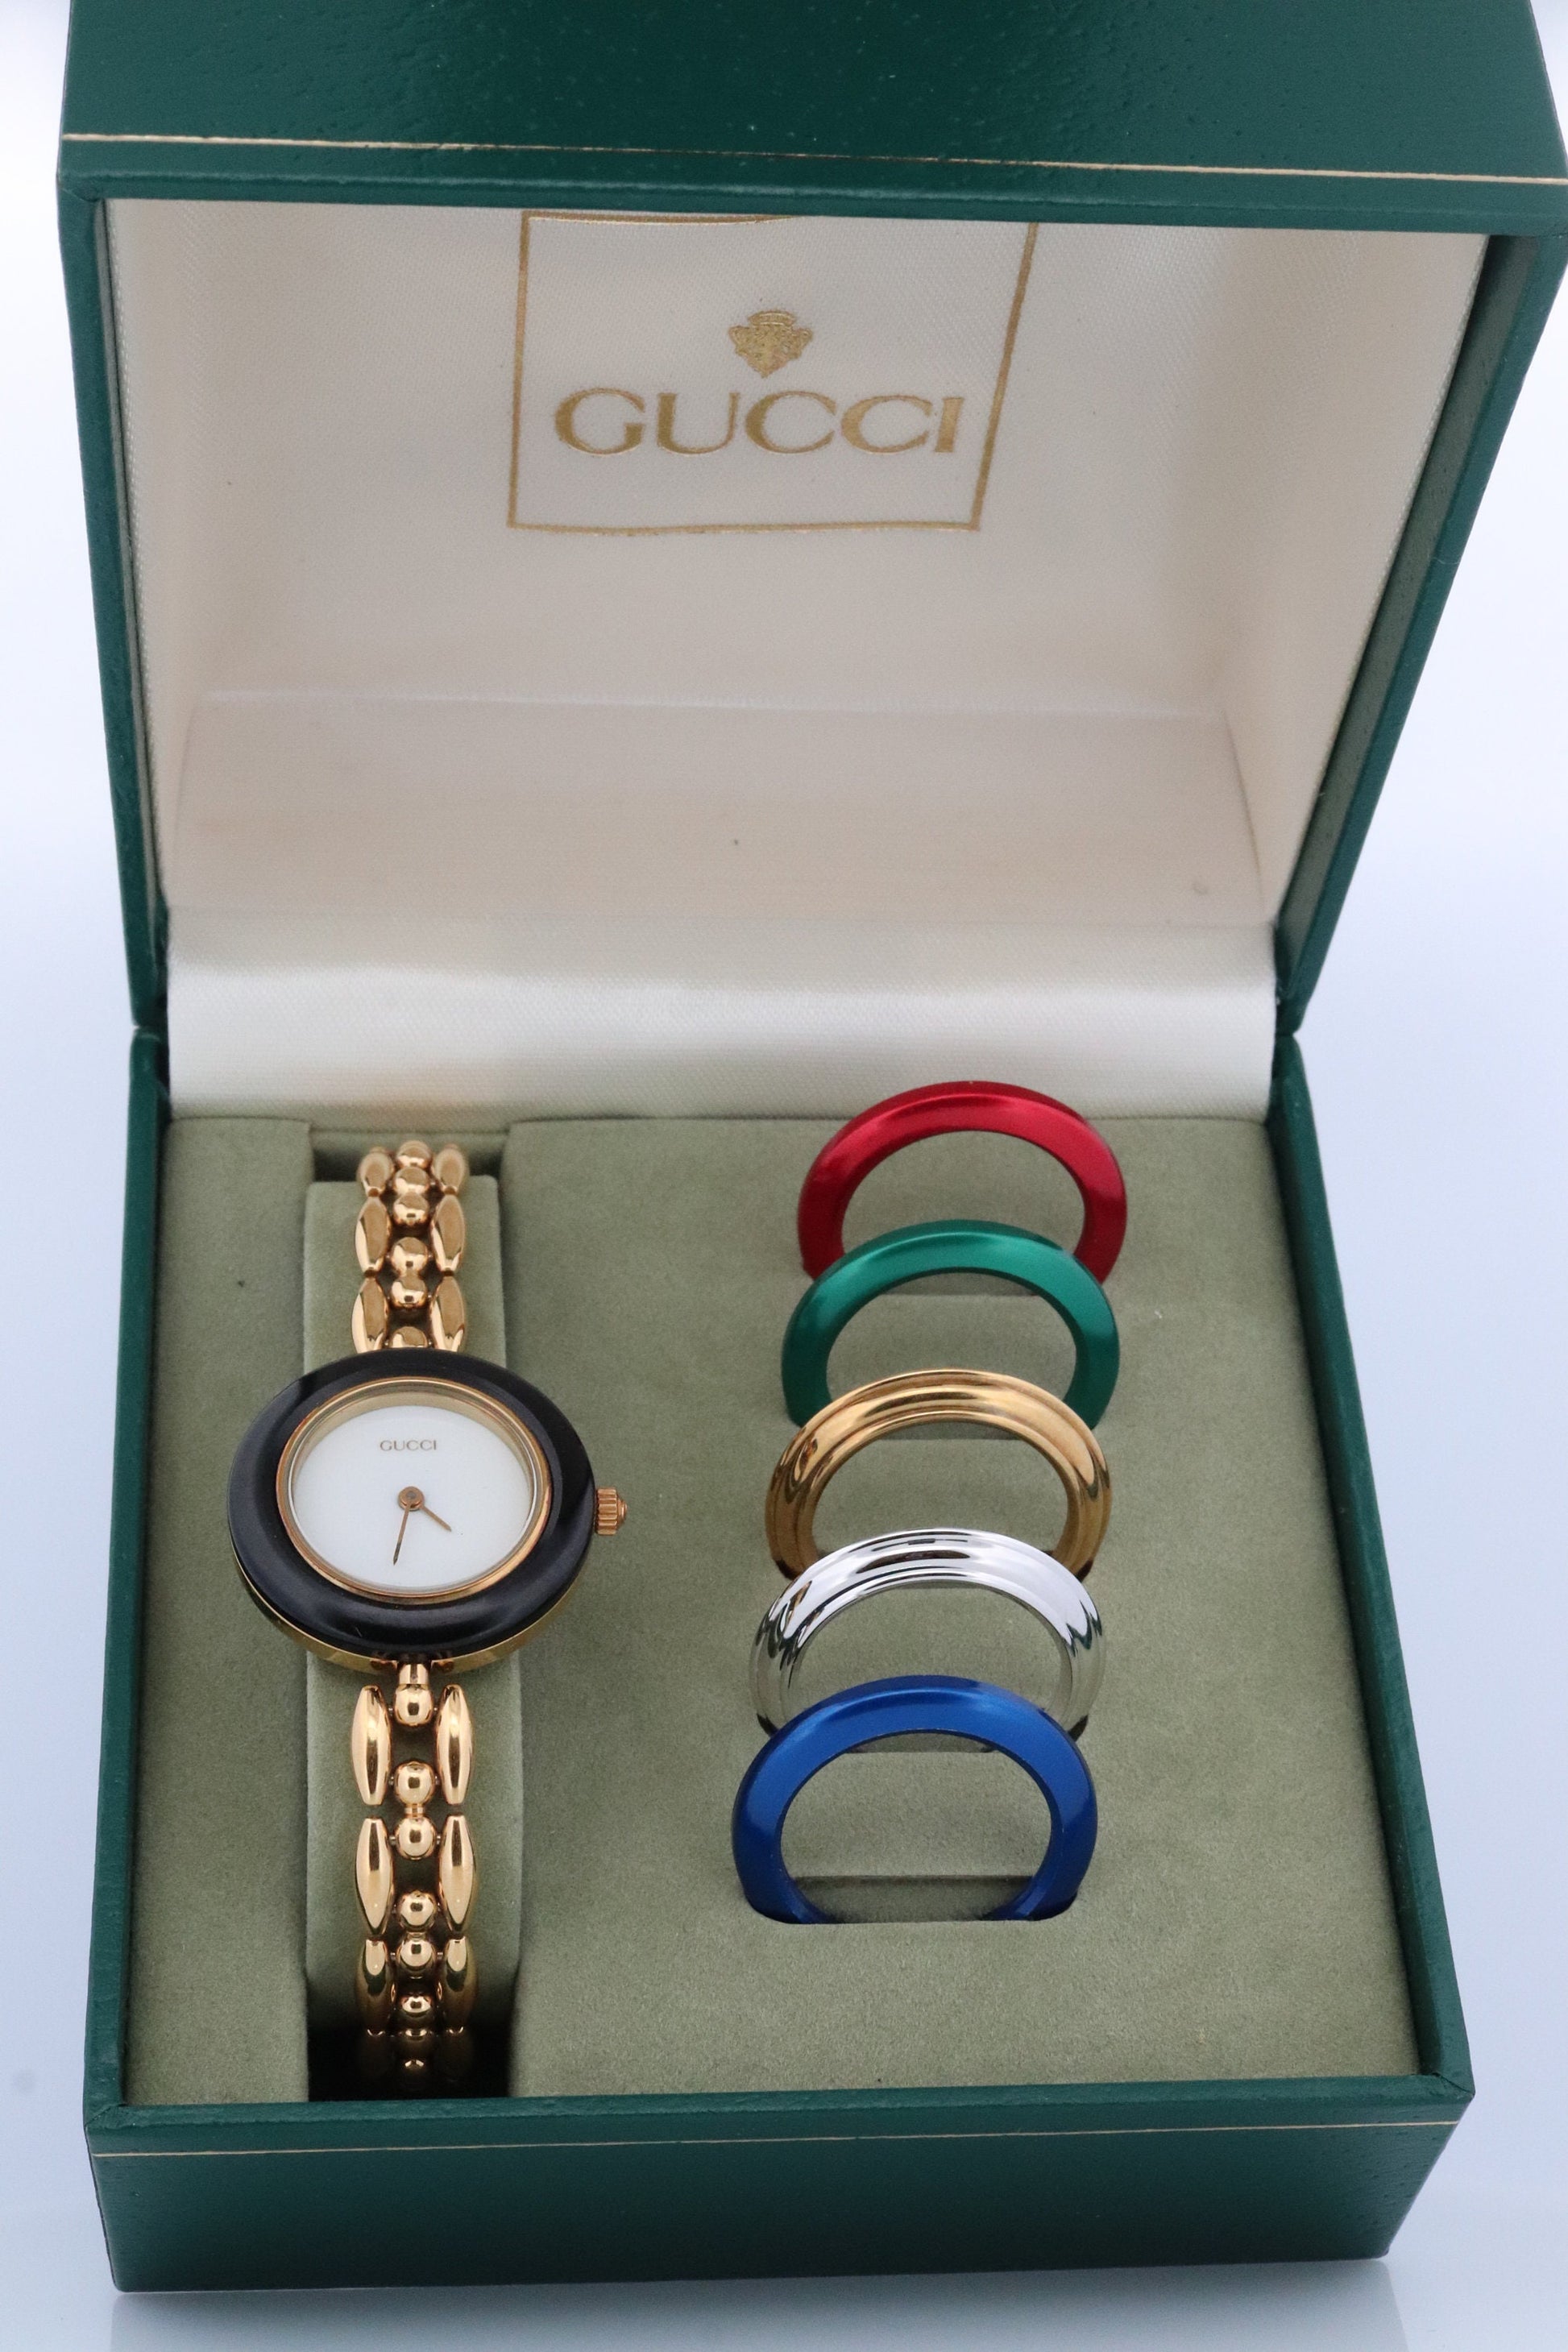 Genuine GUCCI 11/12.2 Watch. Vintage Ladies Gucci Change Bezel Watch. With Box and Bezels.